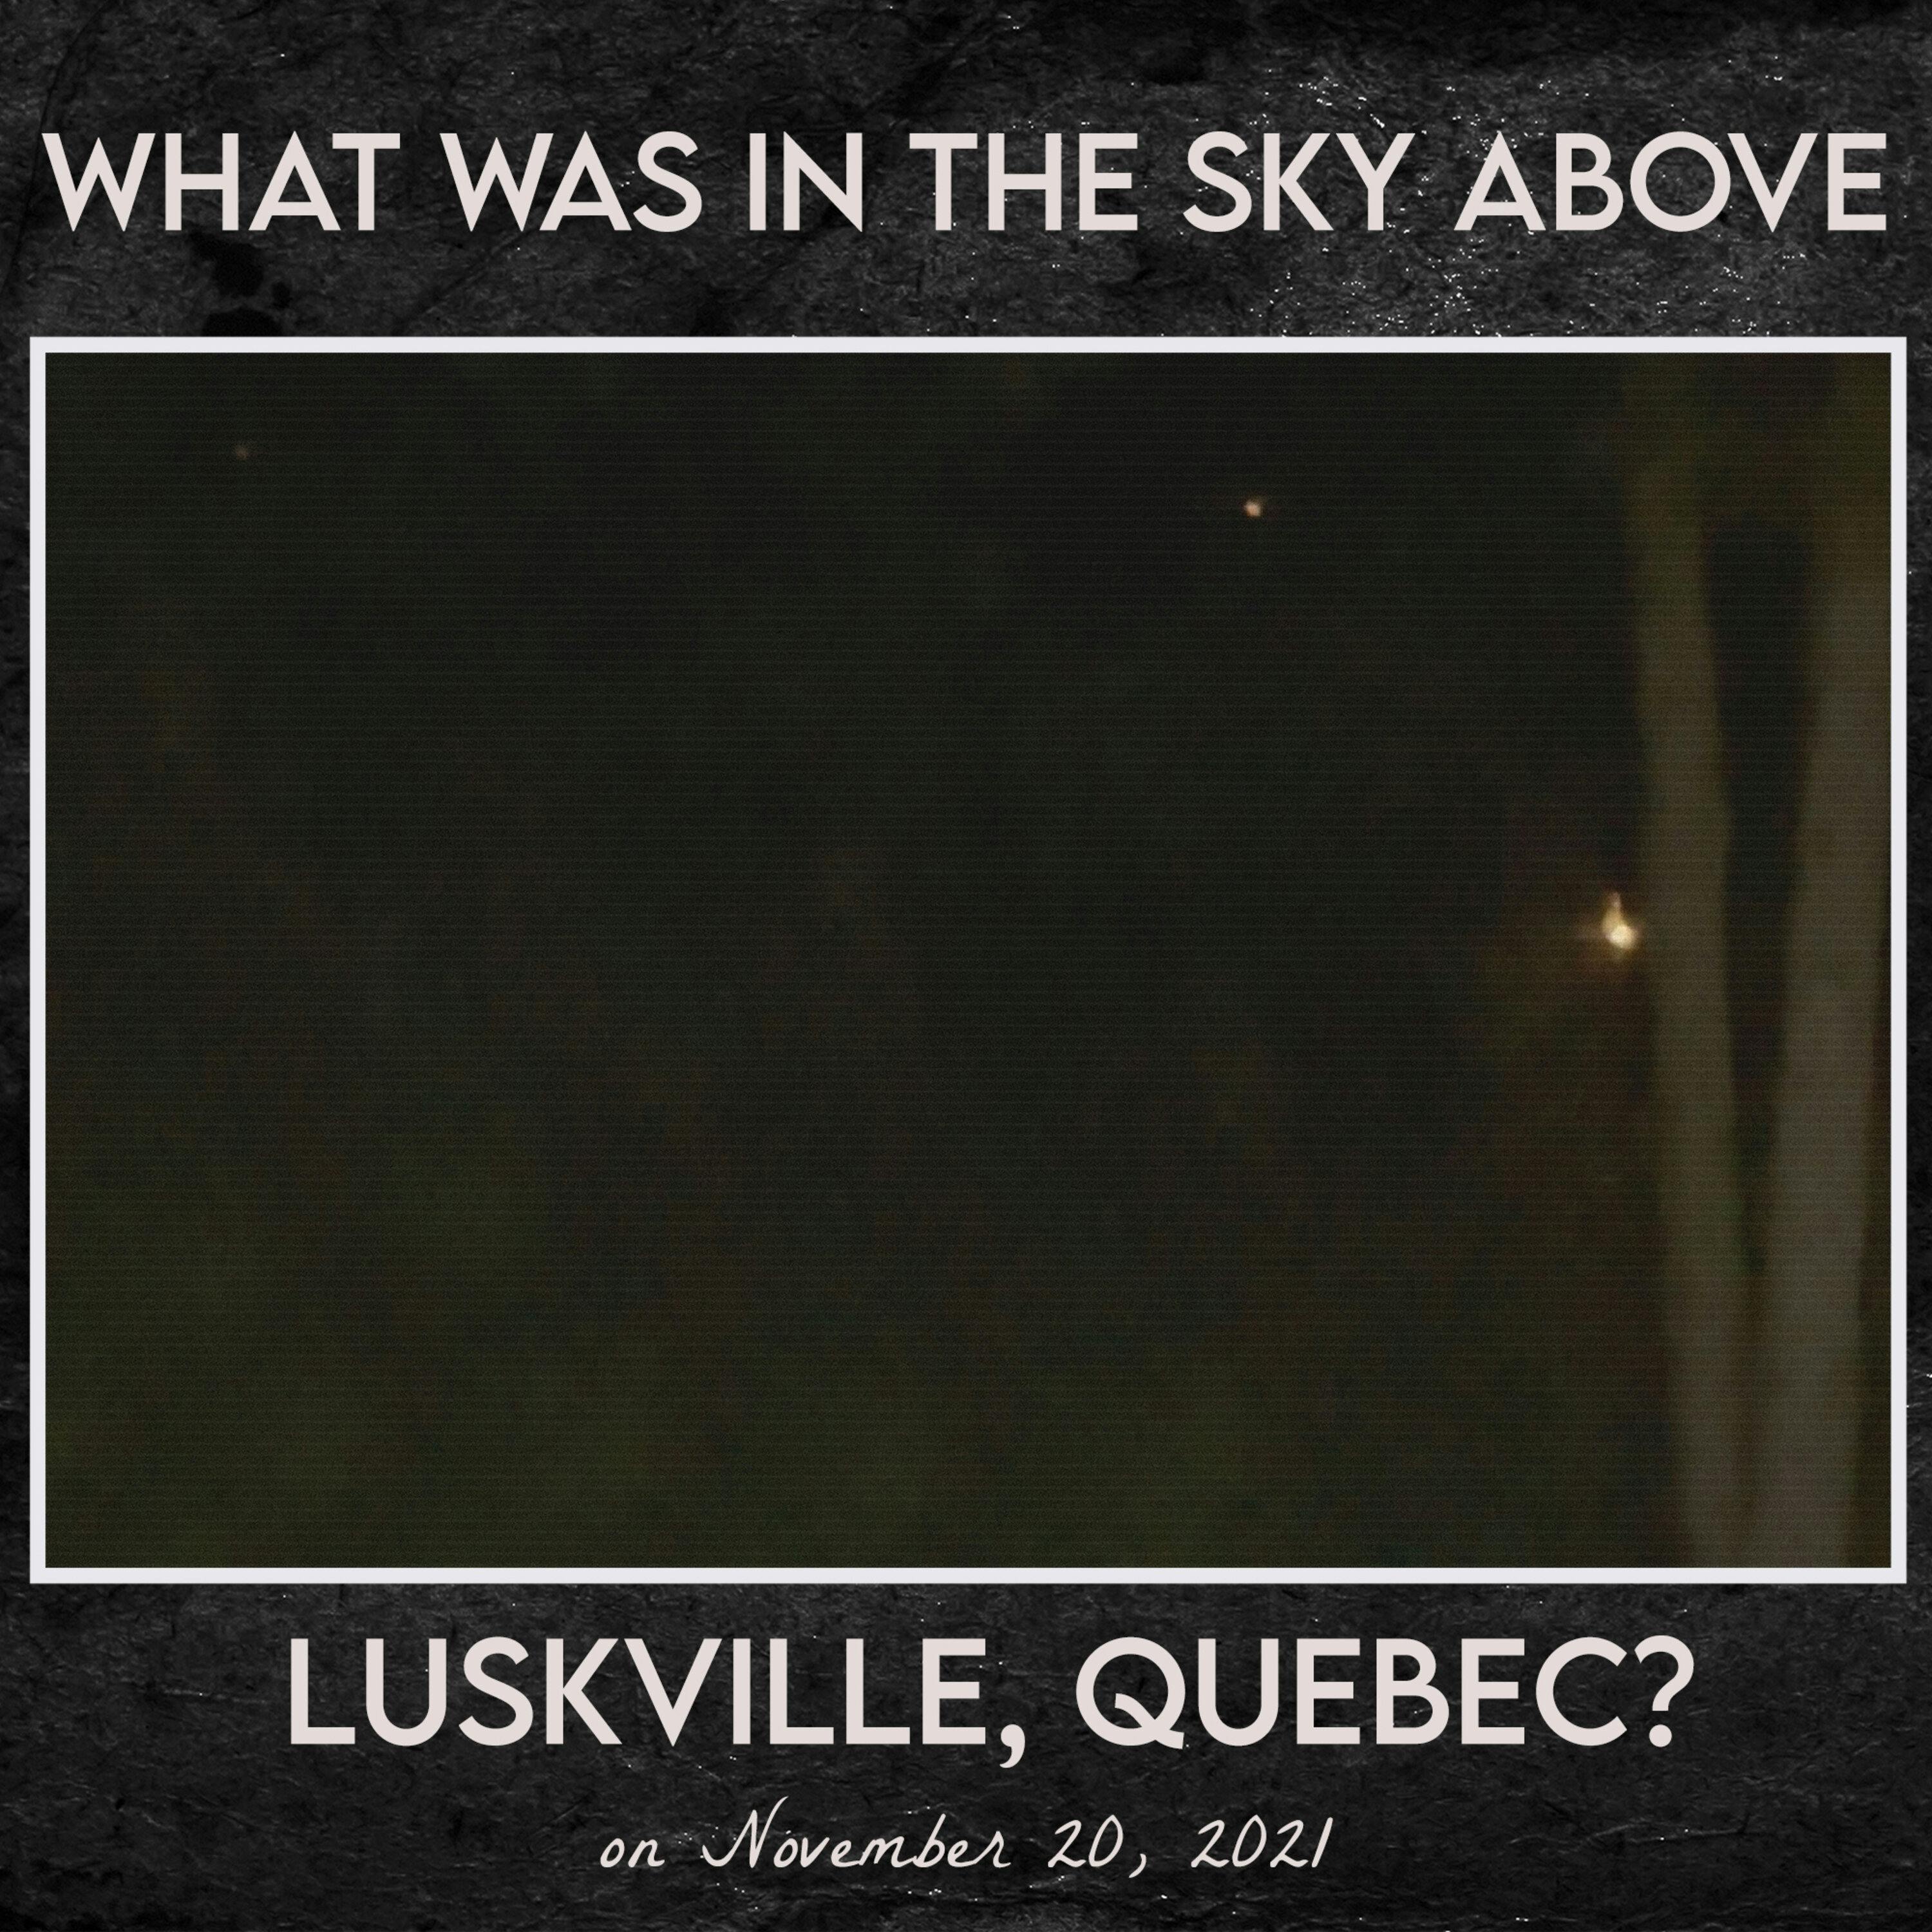 What Was in the Sky Above Luskville, Quebec?